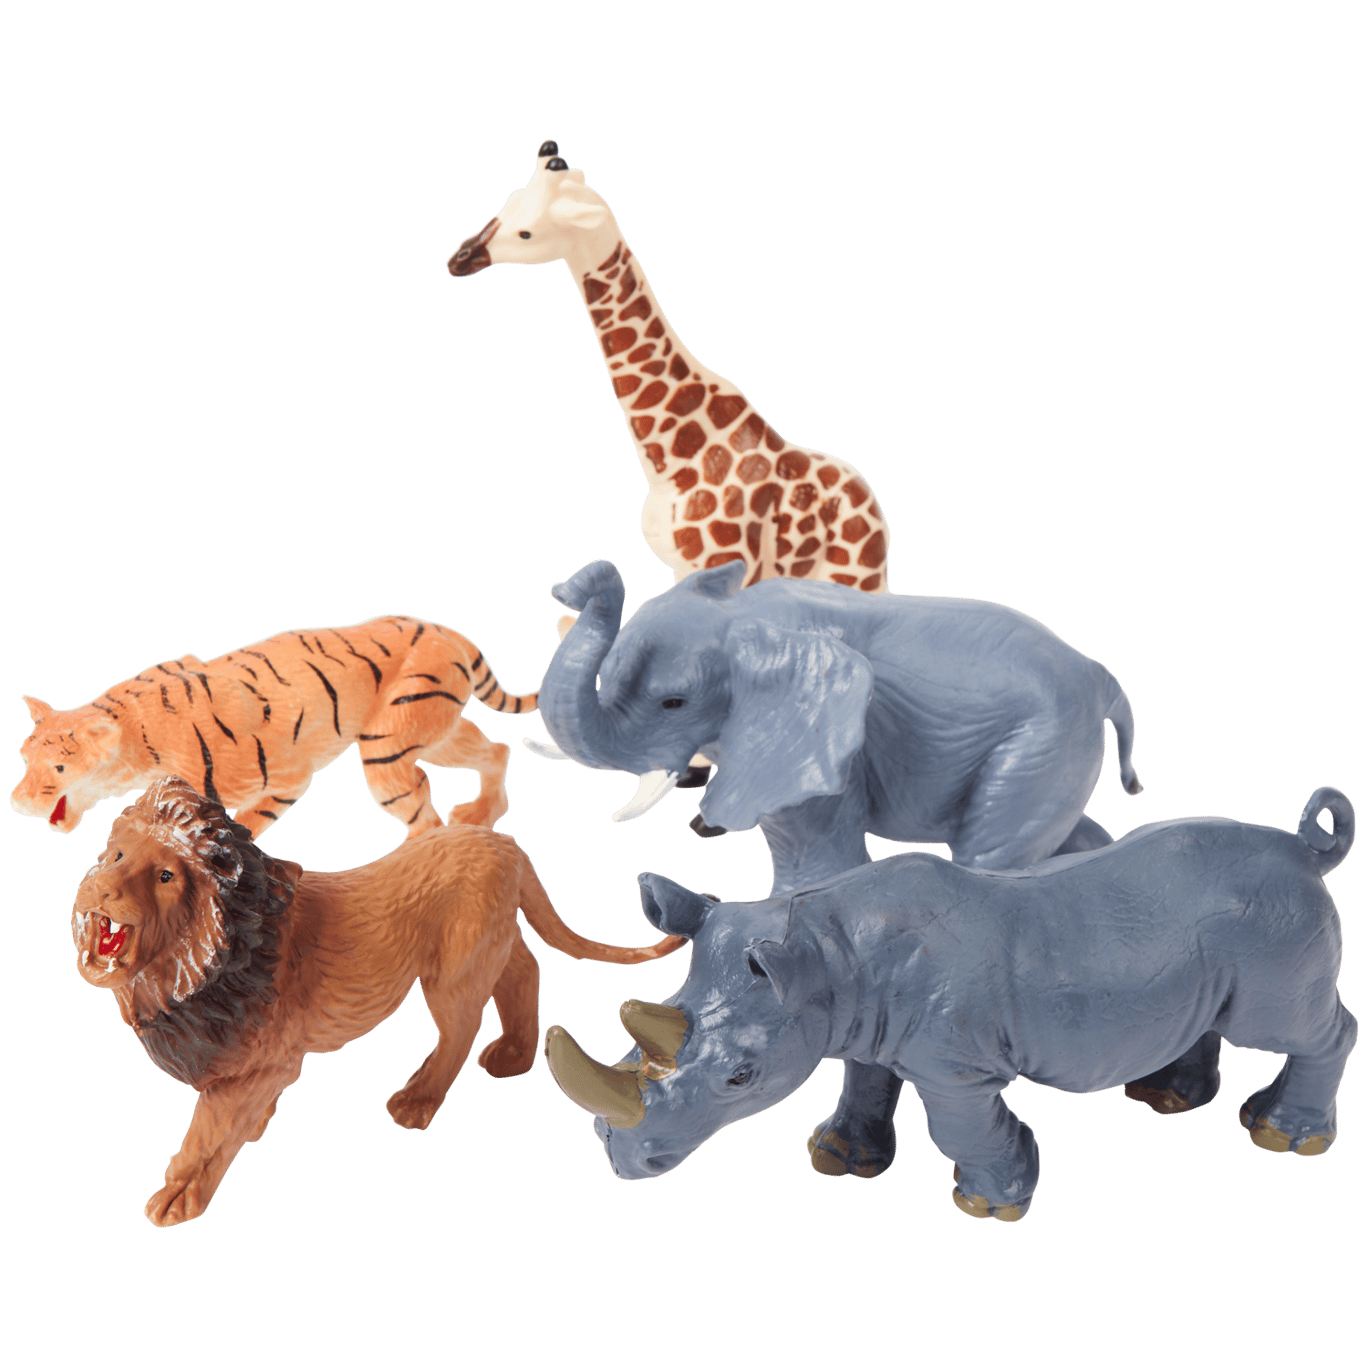 Figurines d'animaux